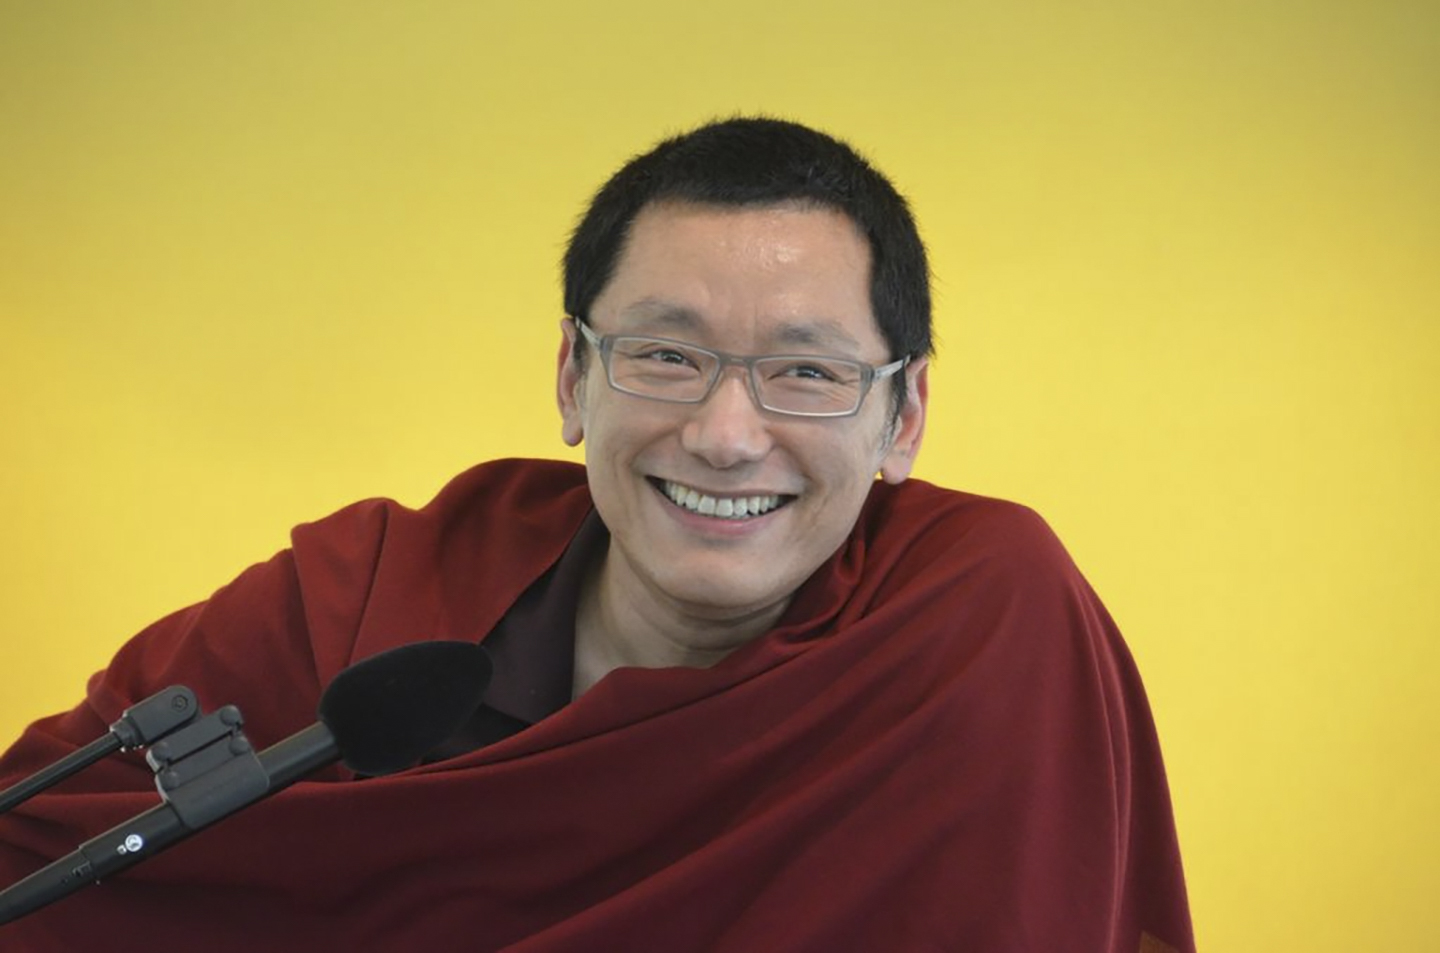 A smiling Buddhist monk with glasses